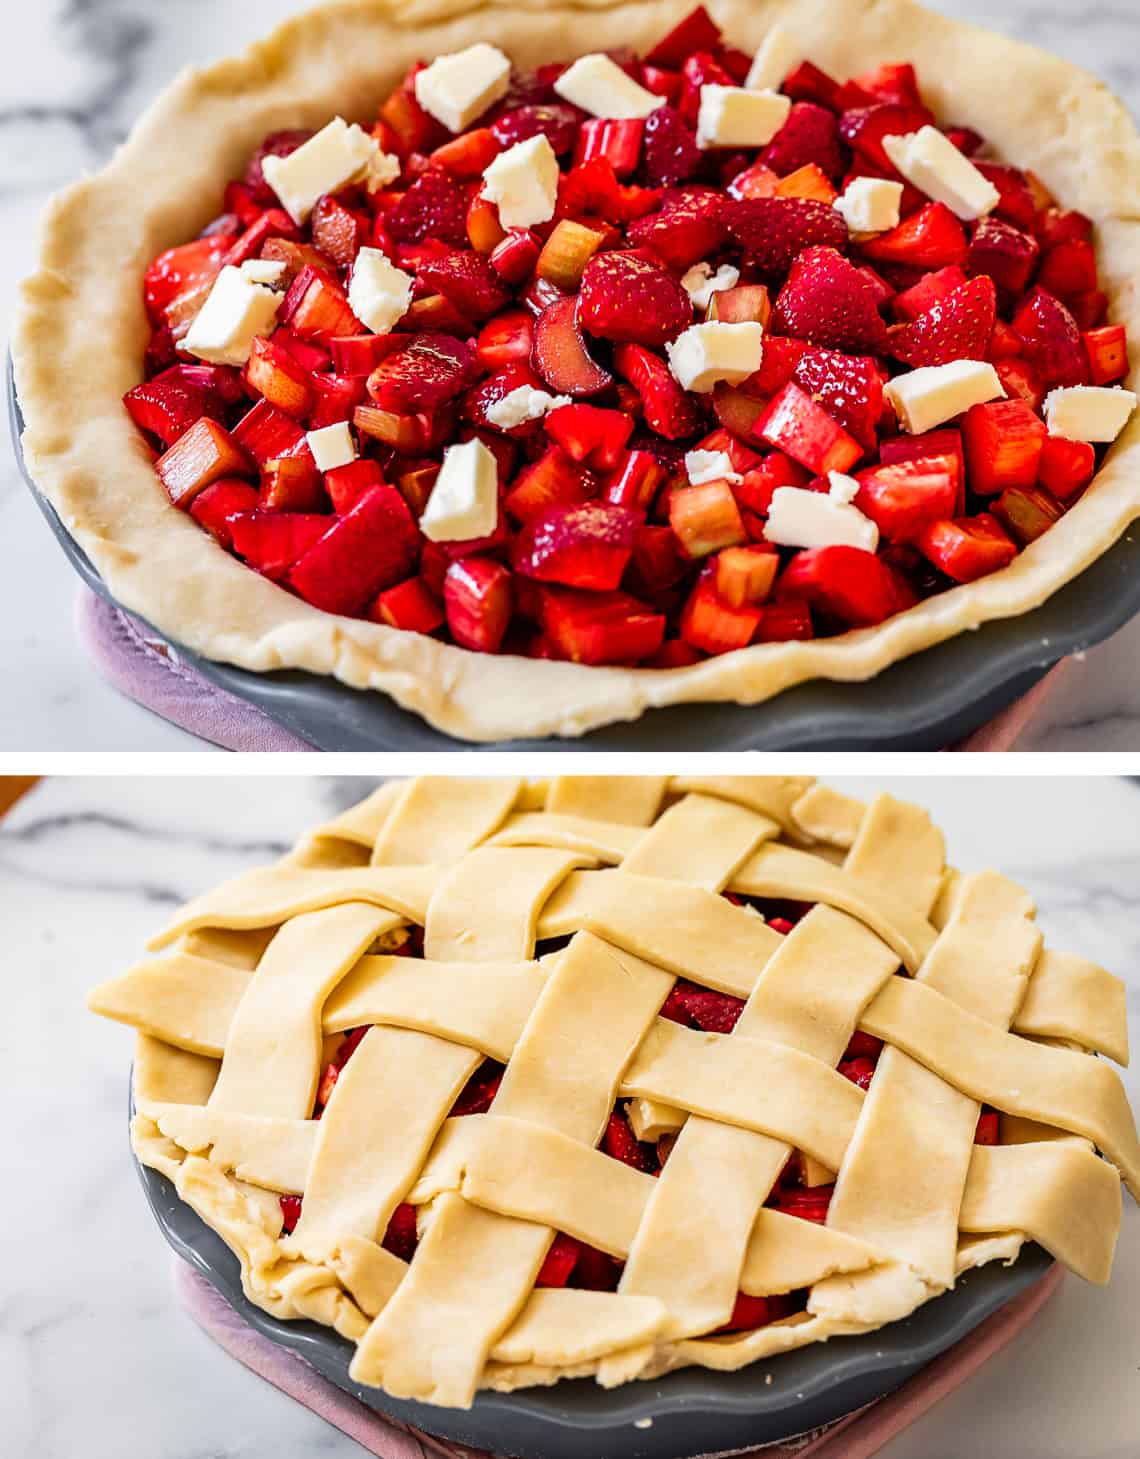 top pic: butter dotting top of filling in crust, bottom lattice crust laid on top.